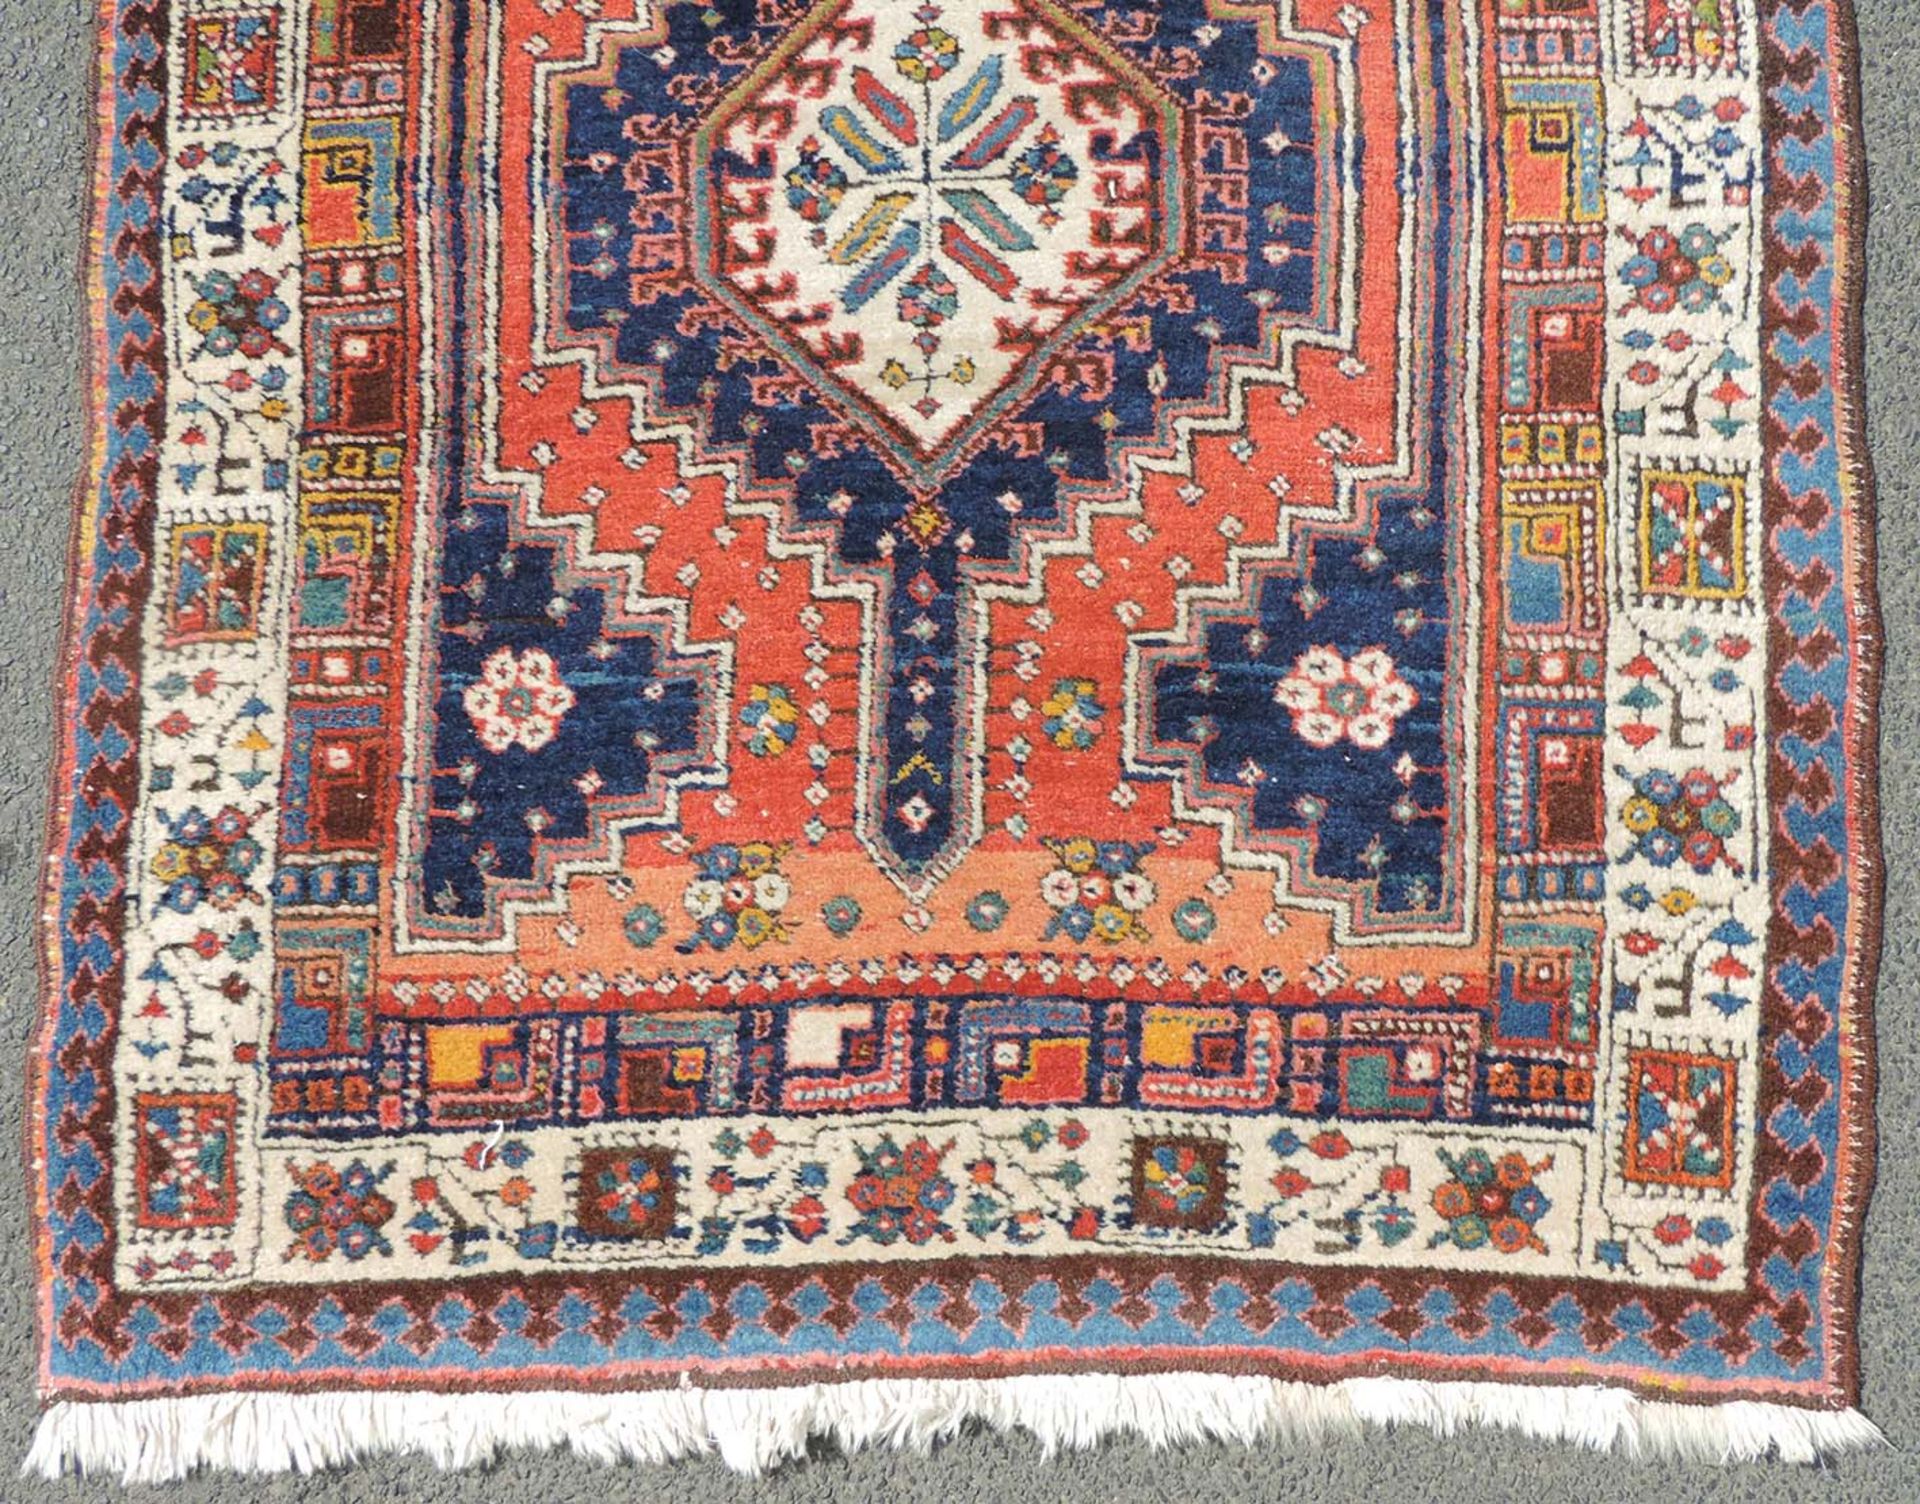 Meshkin Persian rug. Runner. Iran. Old, around 1930.323 cm x 94 cm. Knotted by hand. Wool on cotton. - Image 2 of 7